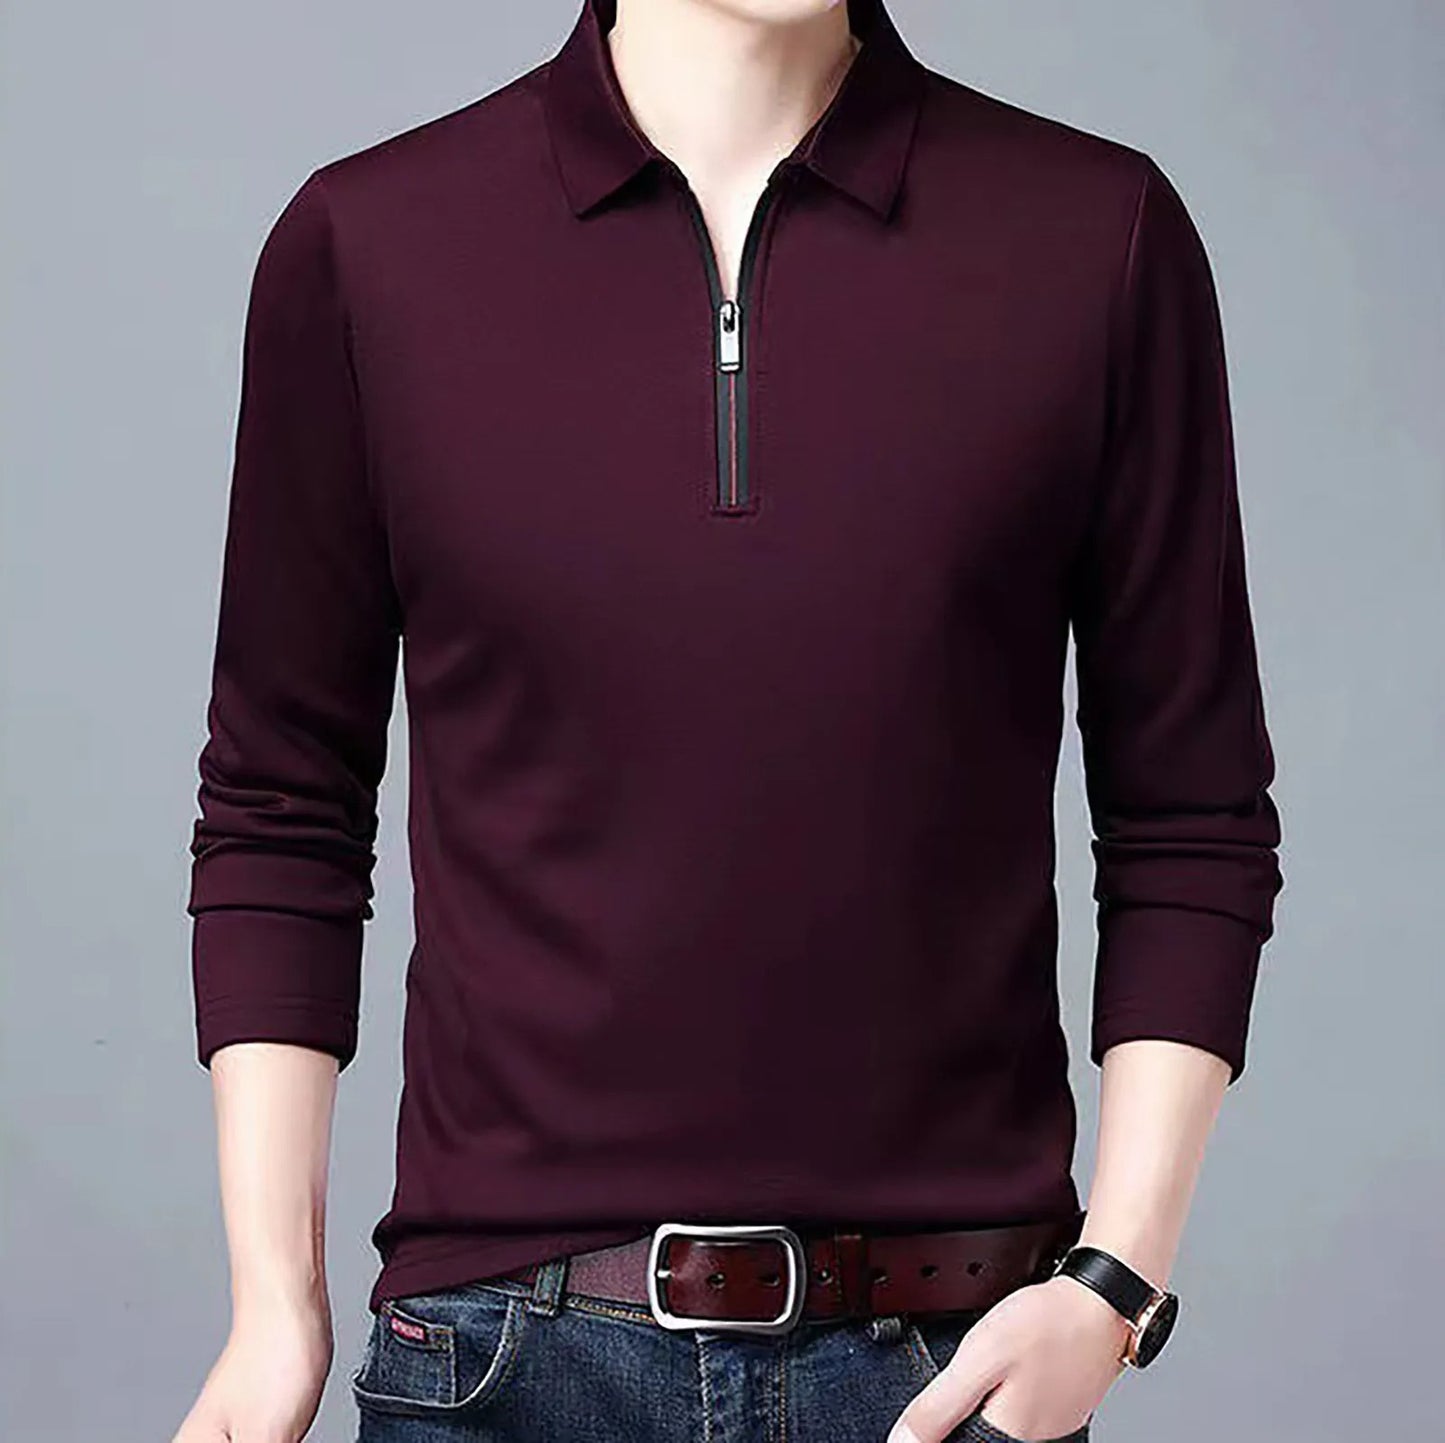 McAlister Dry-Fit Performance Zip Polo